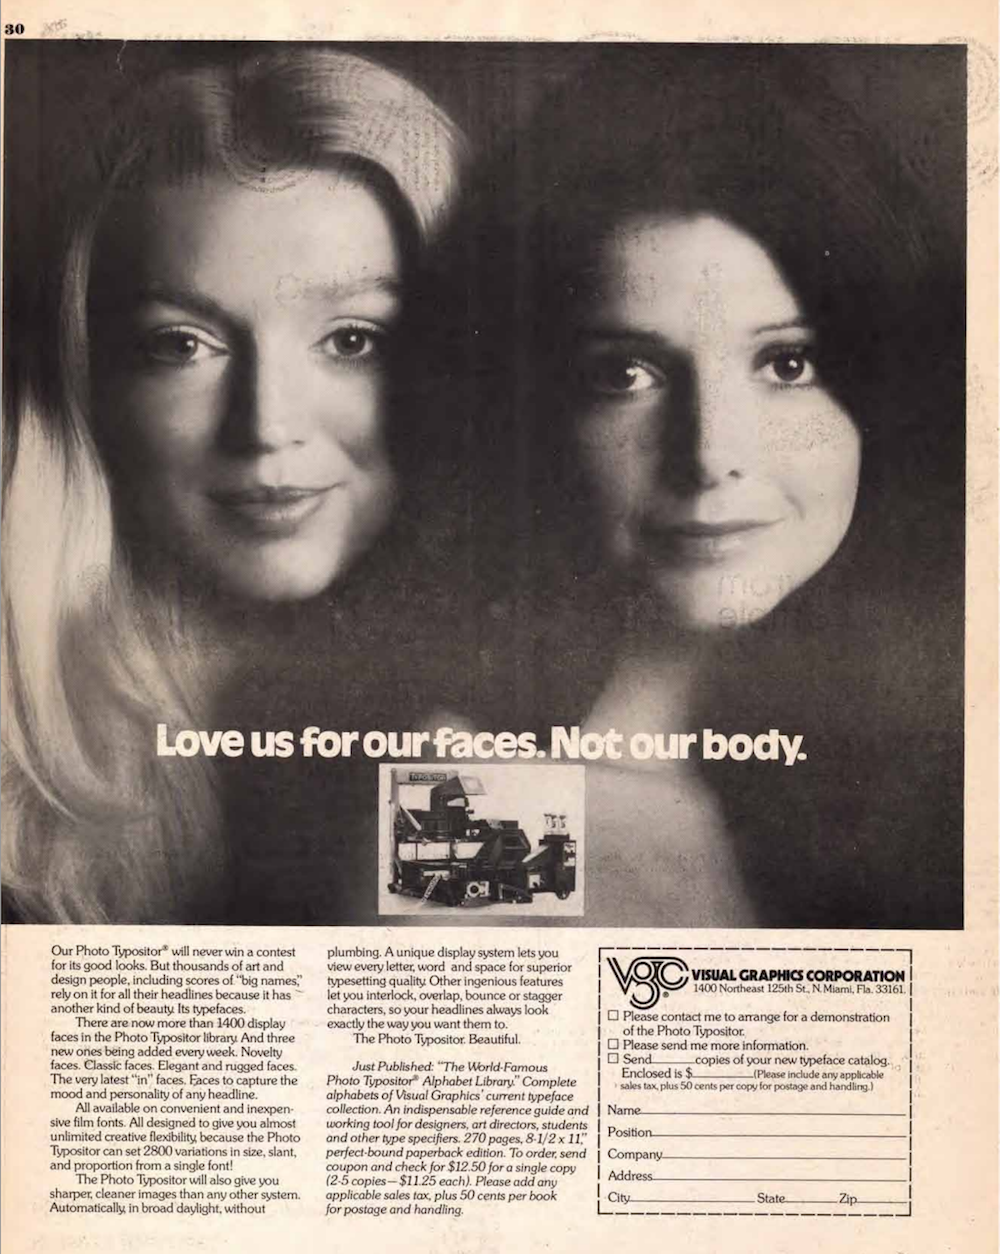 Ad from U&lc for a Photo Typositor showing a photograph of two beautiful women with the text: ‘Love us for our faces. Not our body.’